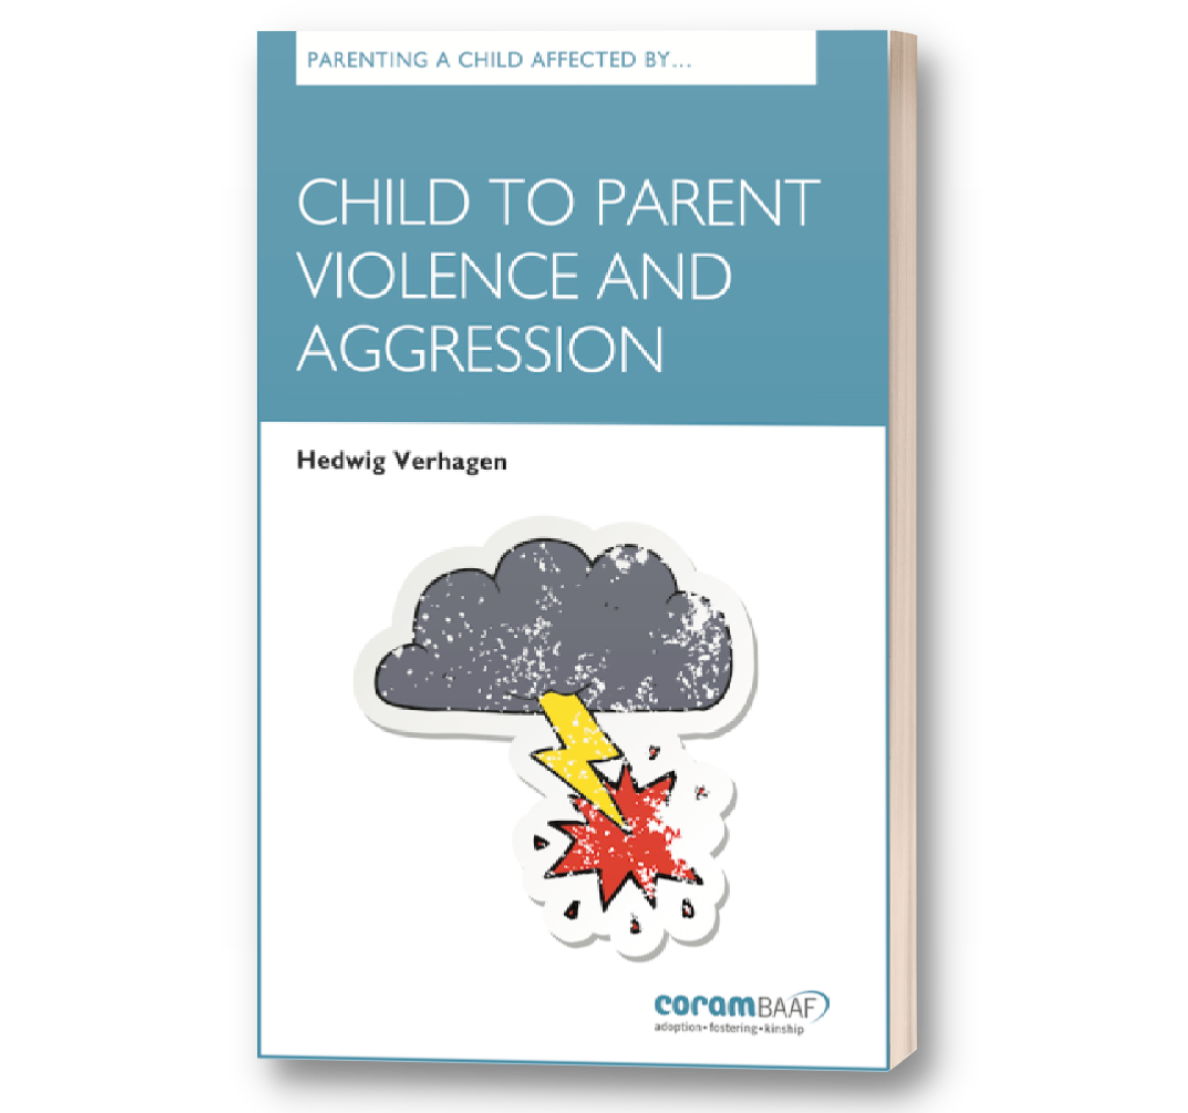 Parenting a child affected by child to parent violence and aggression